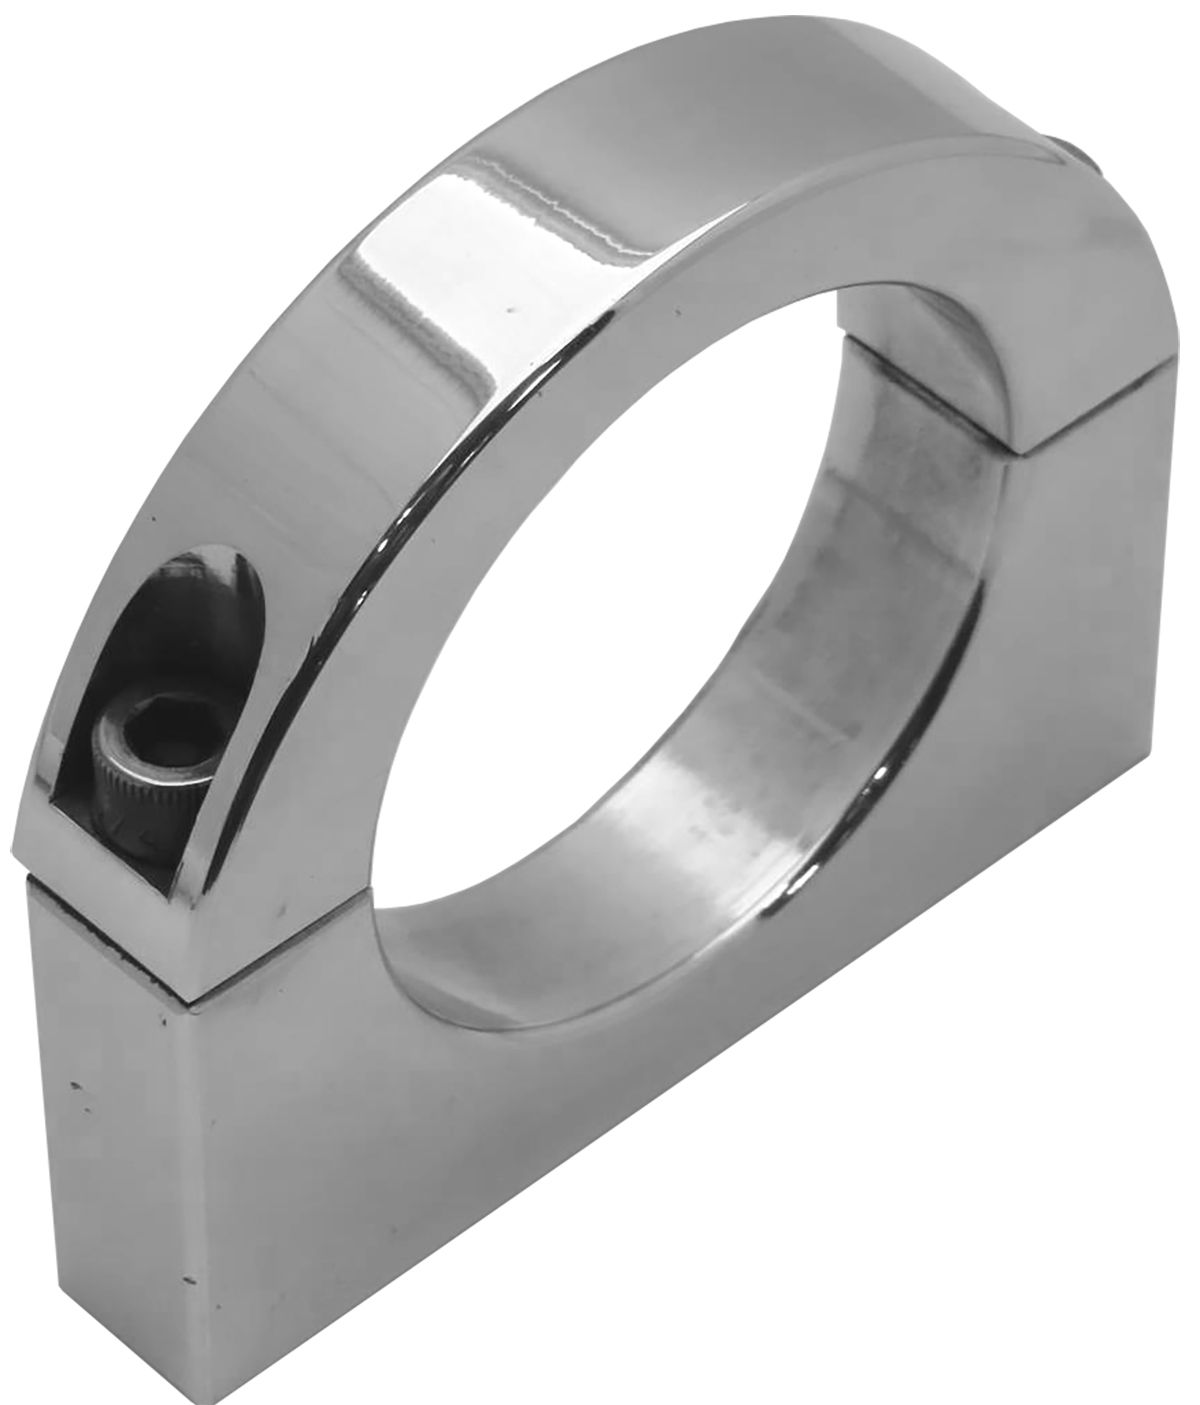 SY204-002250 - D CLAMP 2-1/4" FILTER MOUNT